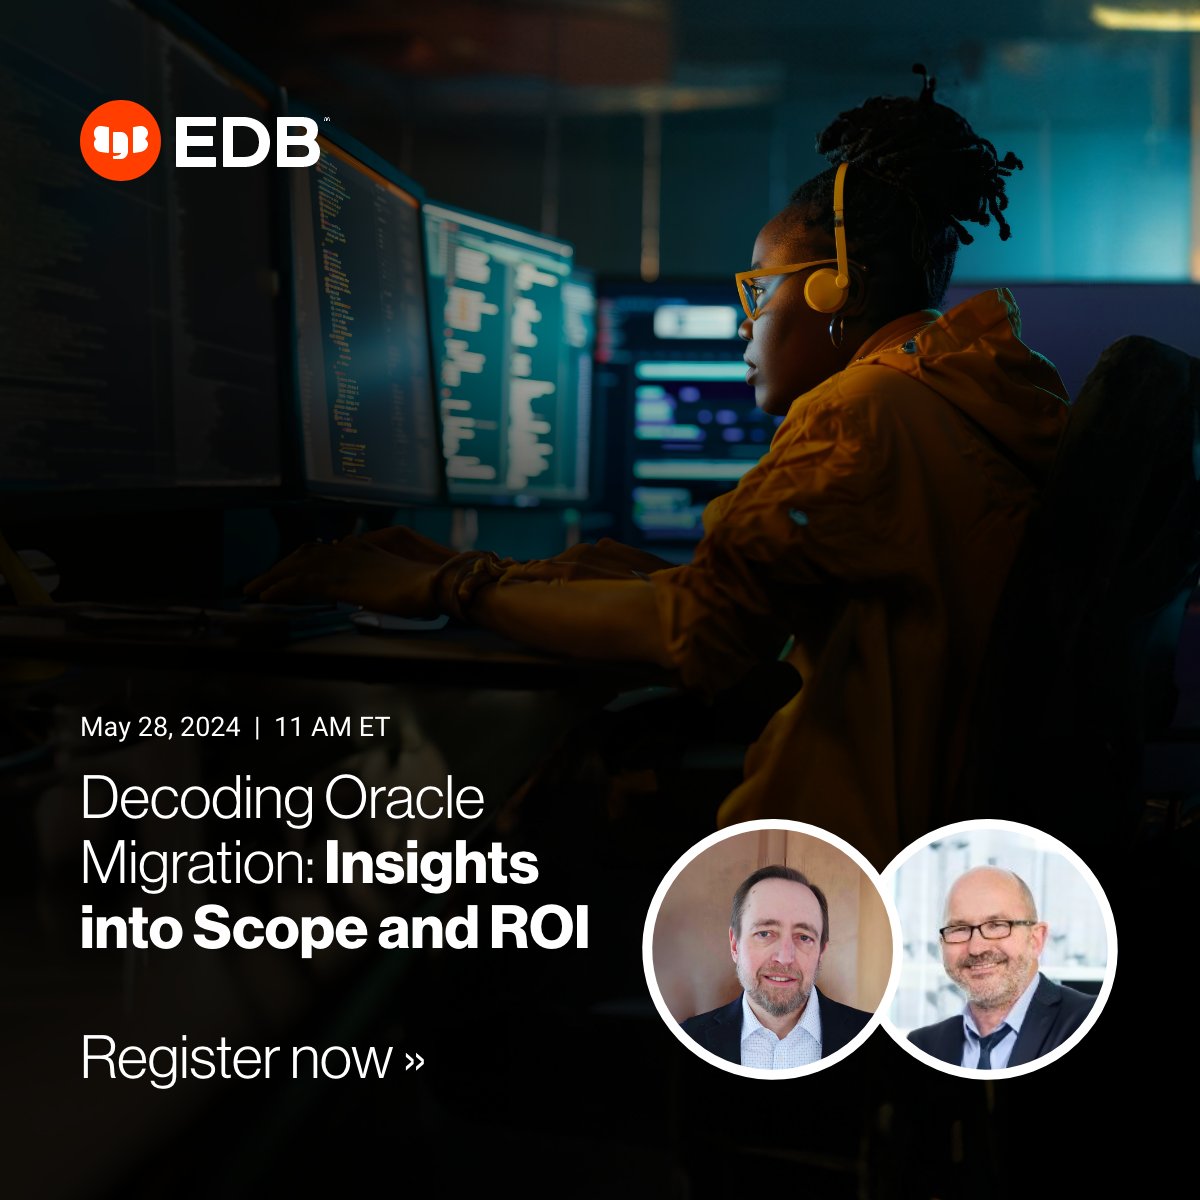 Join us for 'Decoding Oracle Migration: Insights into Scope & ROI' on May 28, 8AM PDT. Learn about Oracle to Postgres migration from experts Marc Linster and Matthew Lewandowski. Register here: bit.ly/3ynBMtC #OracleMigration #Webinar #TechTalk